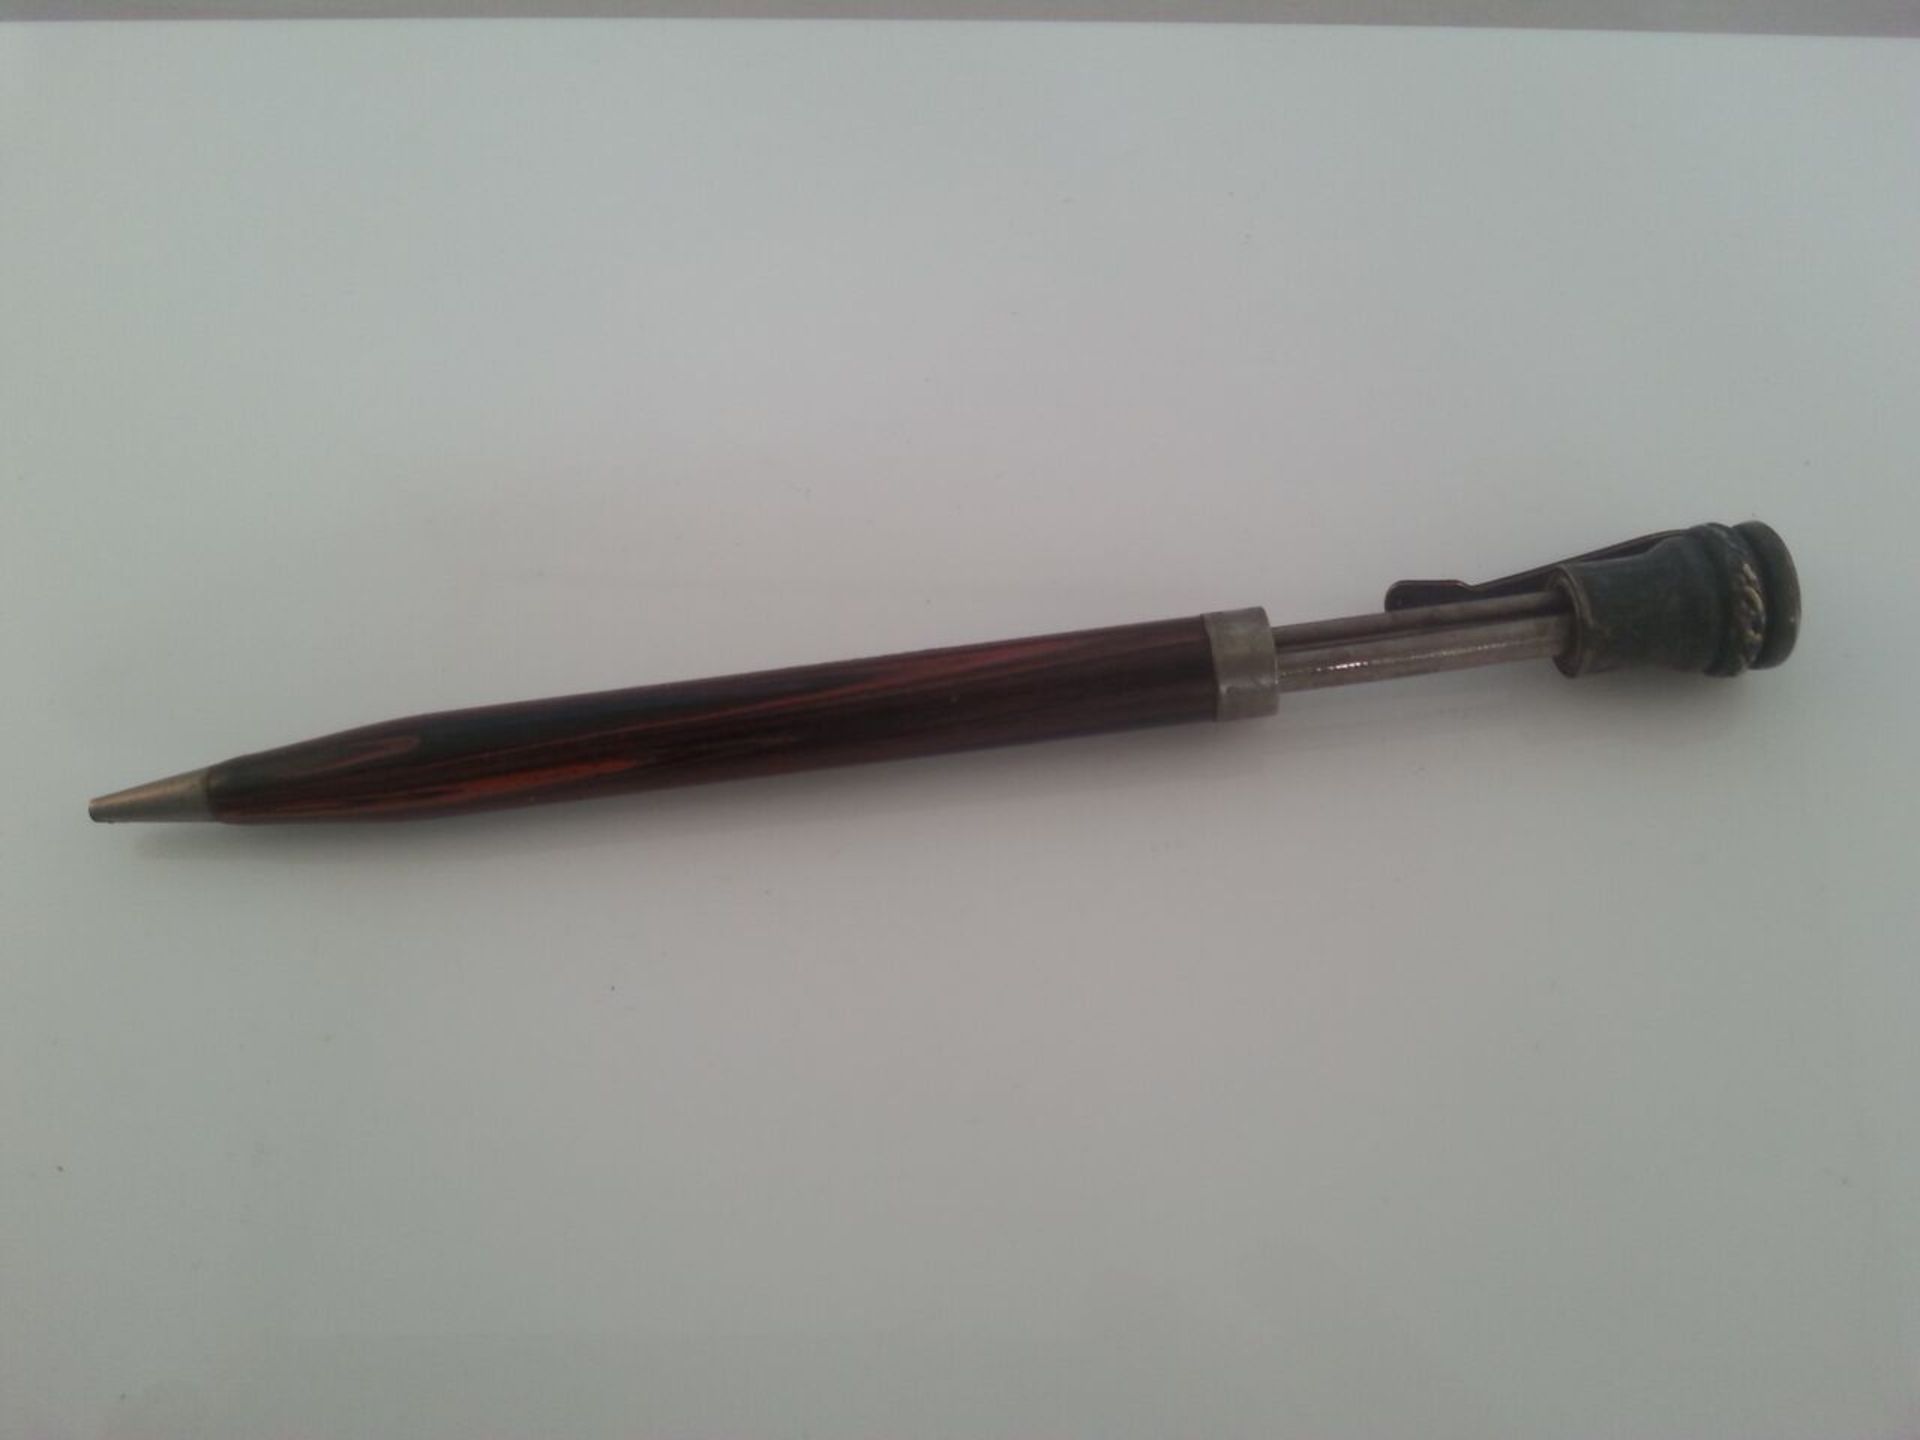 Small group of rare vintage collectable pen & pencil comprising a Style King pen patent pending & - Image 2 of 4